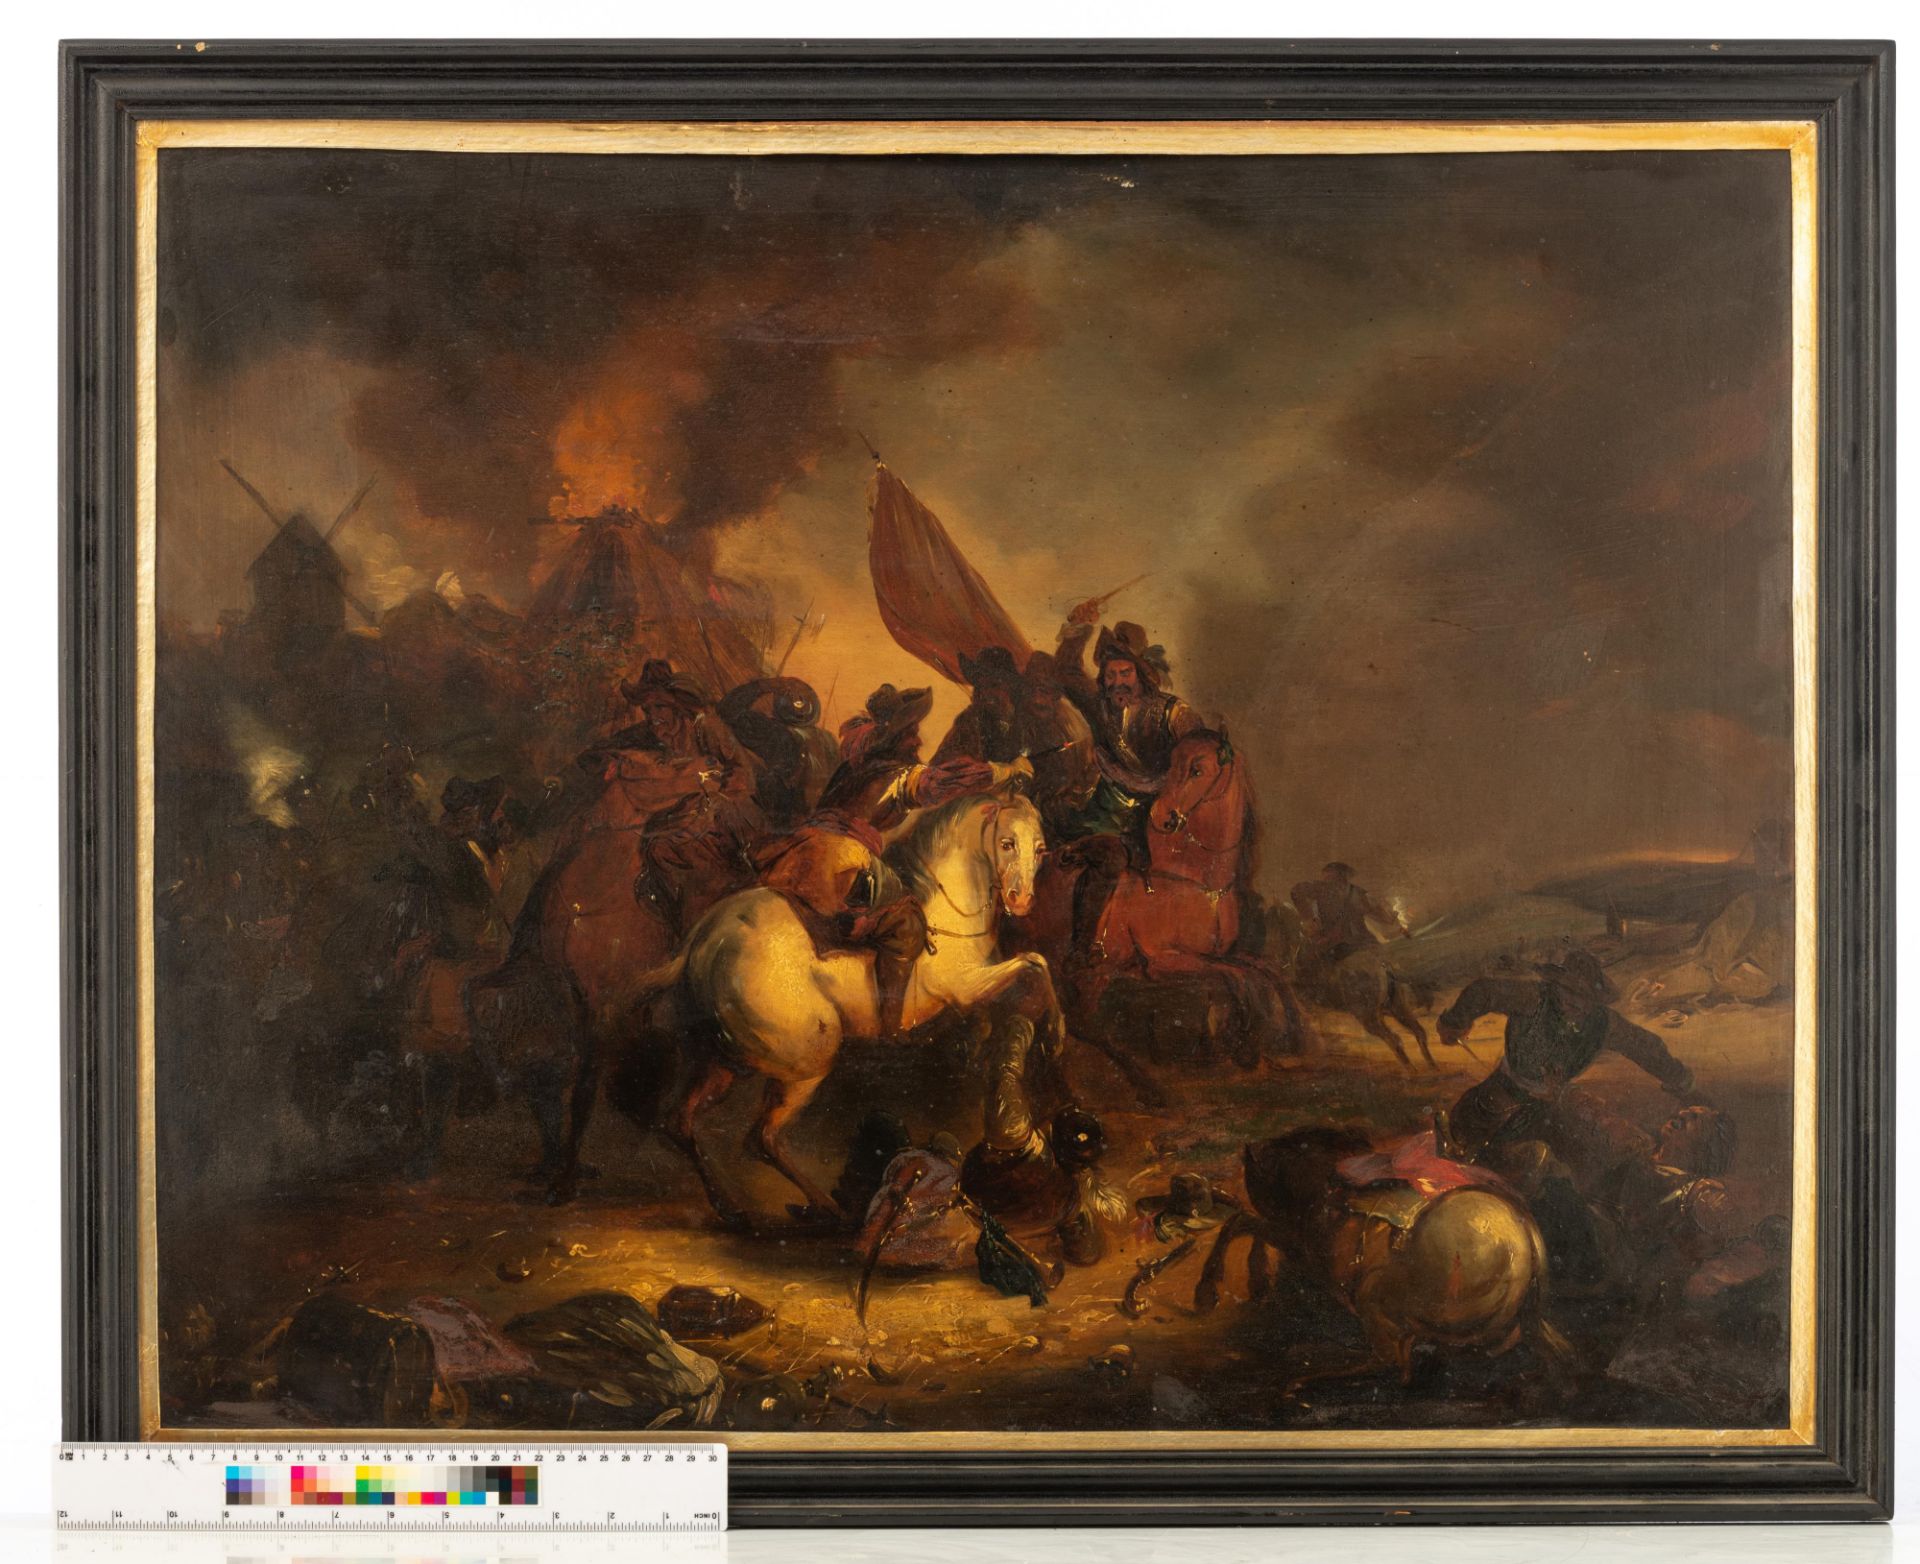 No visible signature, the heat of the battle, 19thC, oil on panel, 62 x 79 cm - Image 8 of 8